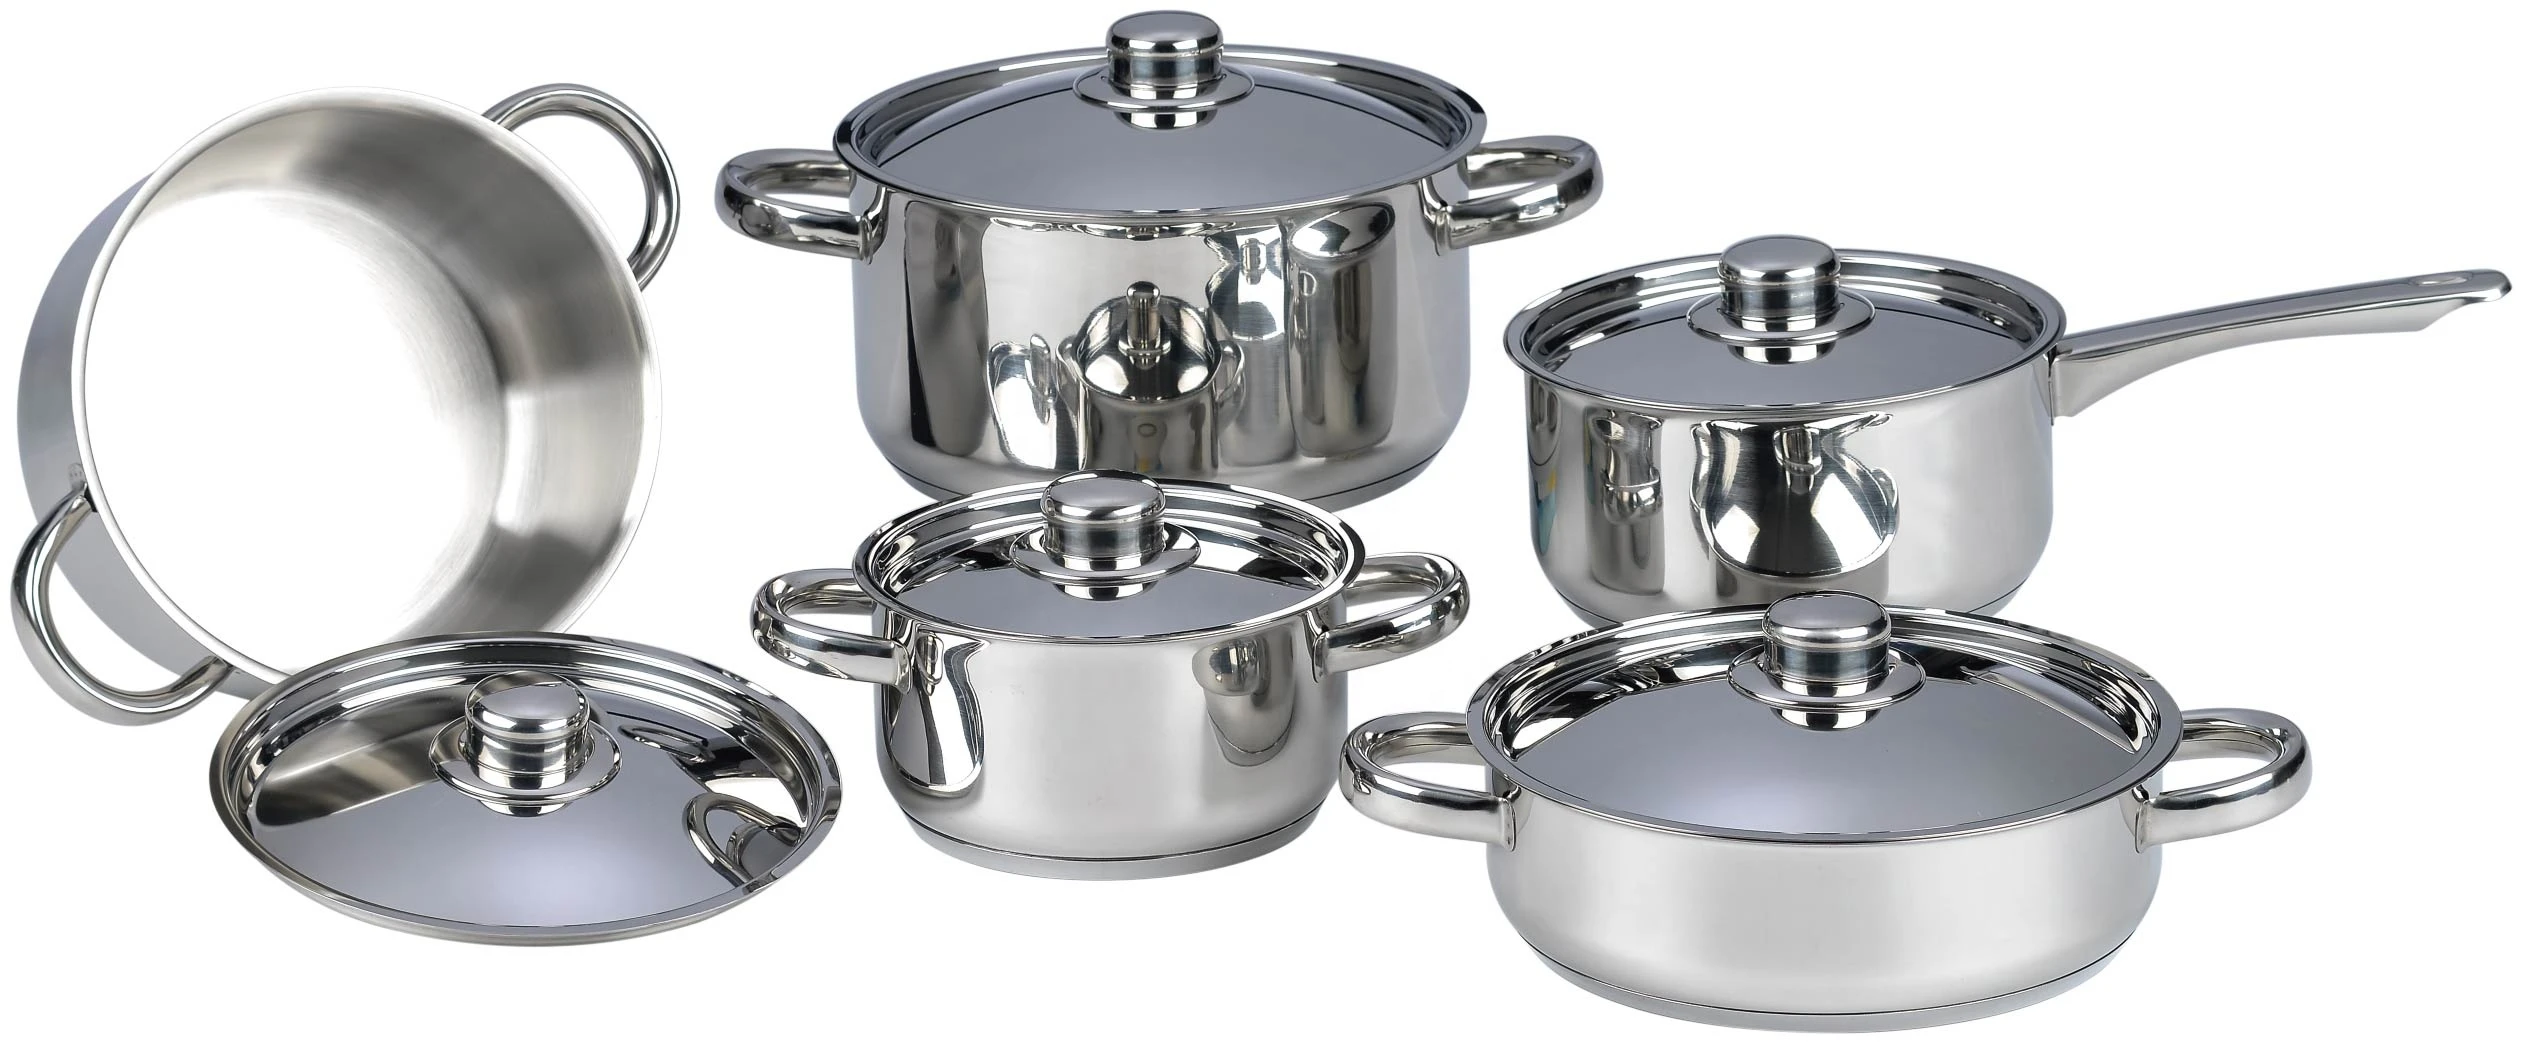 Cheap kitchenware cooking pots cookware